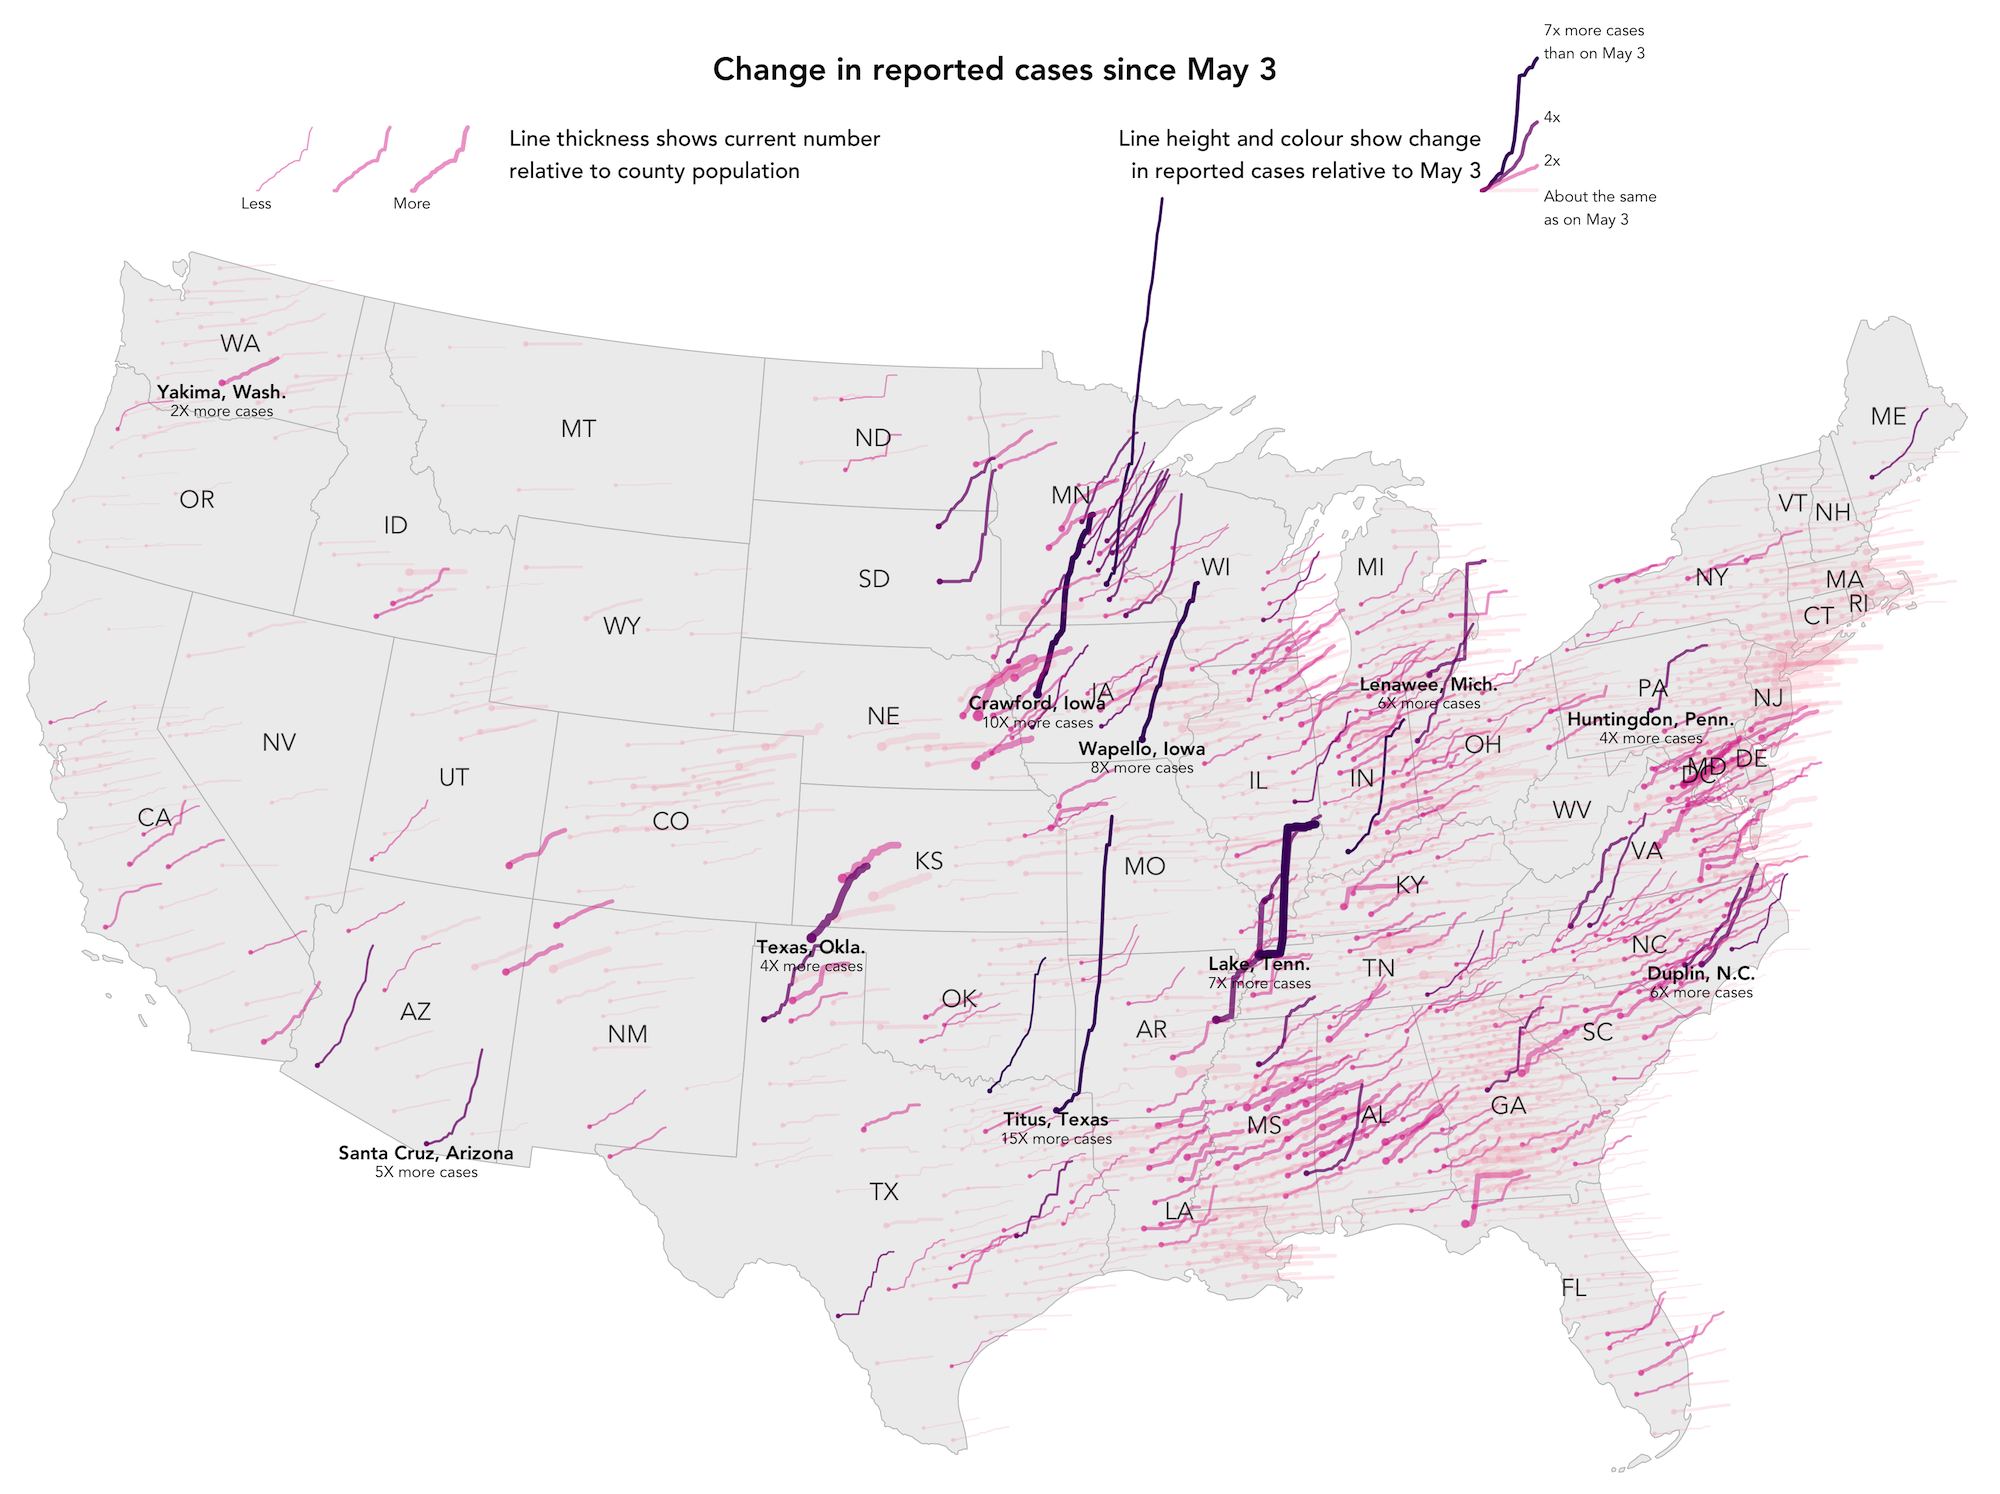 Glyphmap design displaying growth in COVID-19 cases by US county, based on the design by Thebault and Hauslohner, original in [The Washington Post](https://www.washingtonpost.com/nation/2020/05/24/coronavirus-rural-america-outbreaks/?arc404=true).